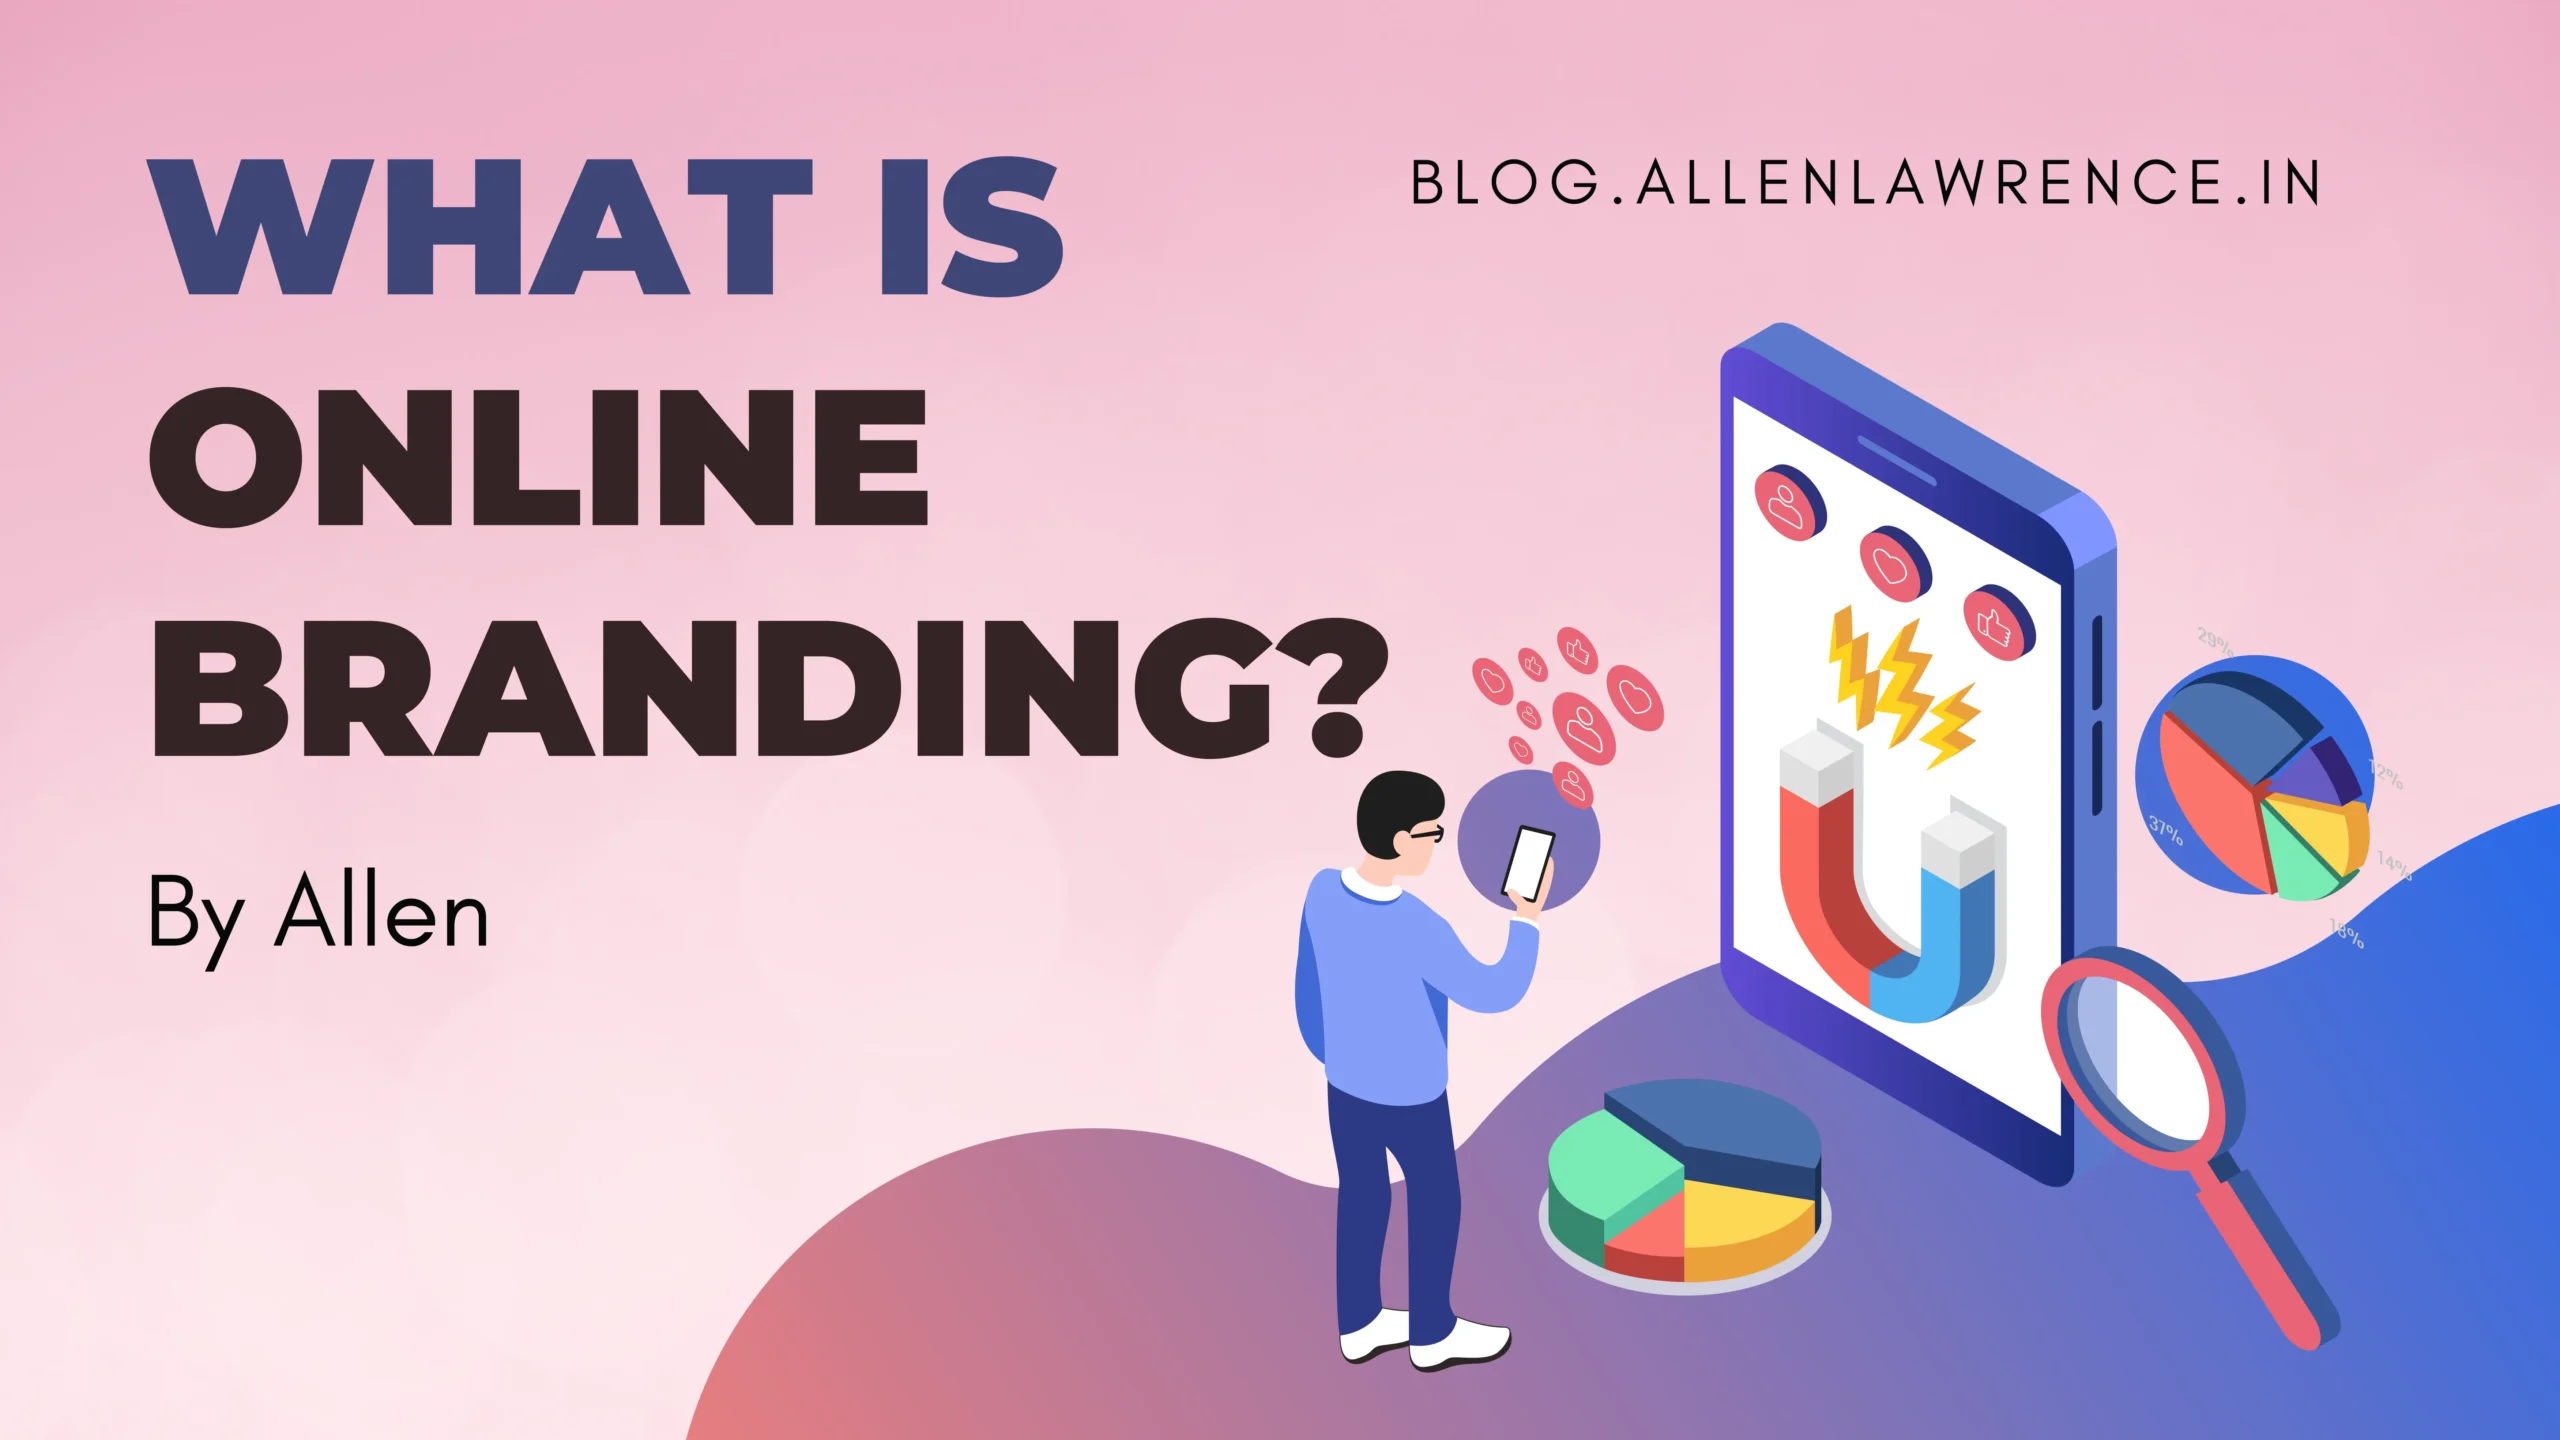 Why is Online Branding Important?